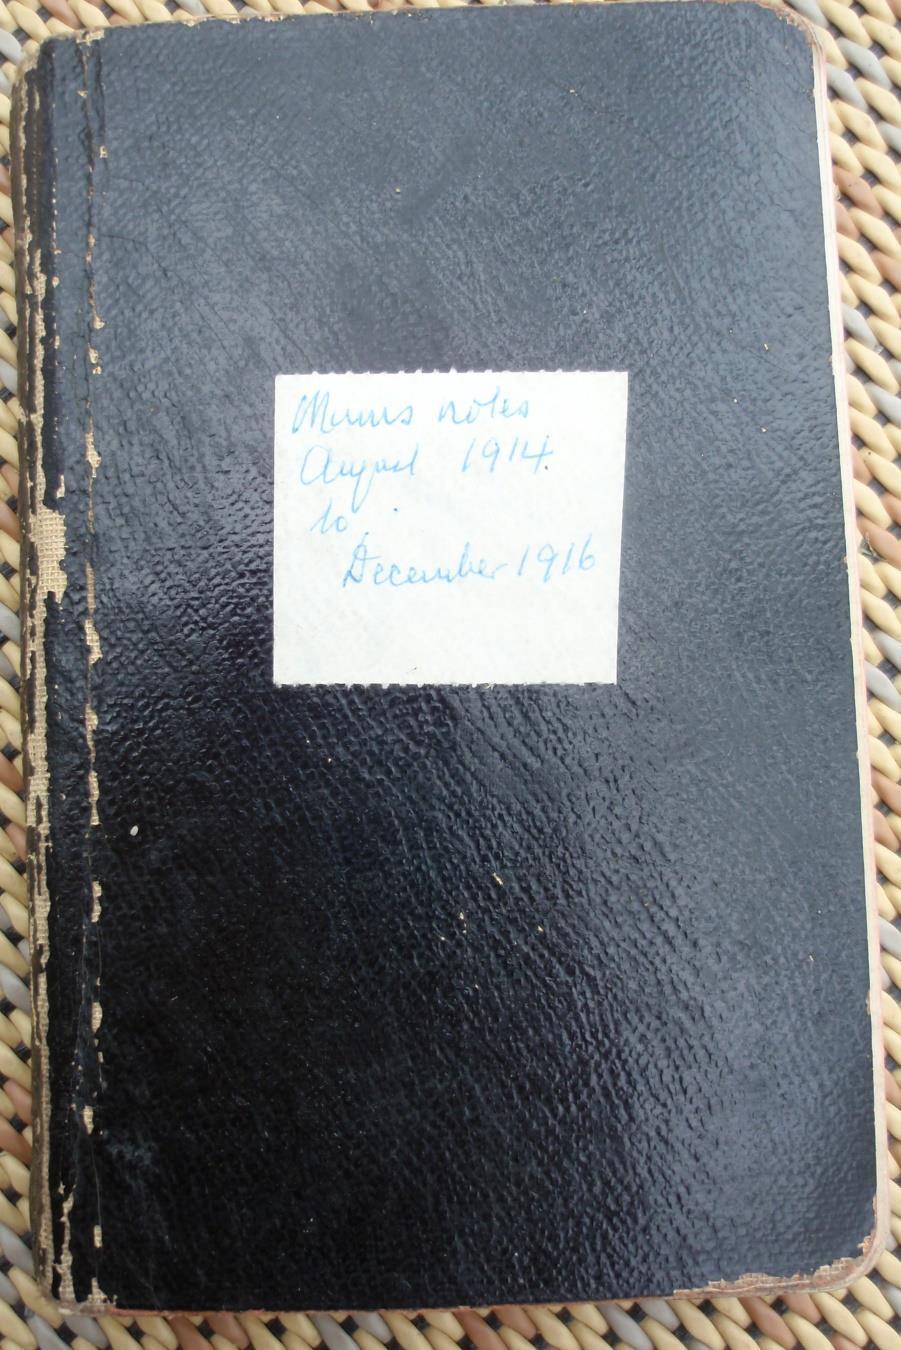 DIARY OF ELSIE CLEMENTS, FARMER'S WIFE, OF CROCKENHILL 4 August 1914 Aleck (her husband) home from 9.30 a.m. from London.